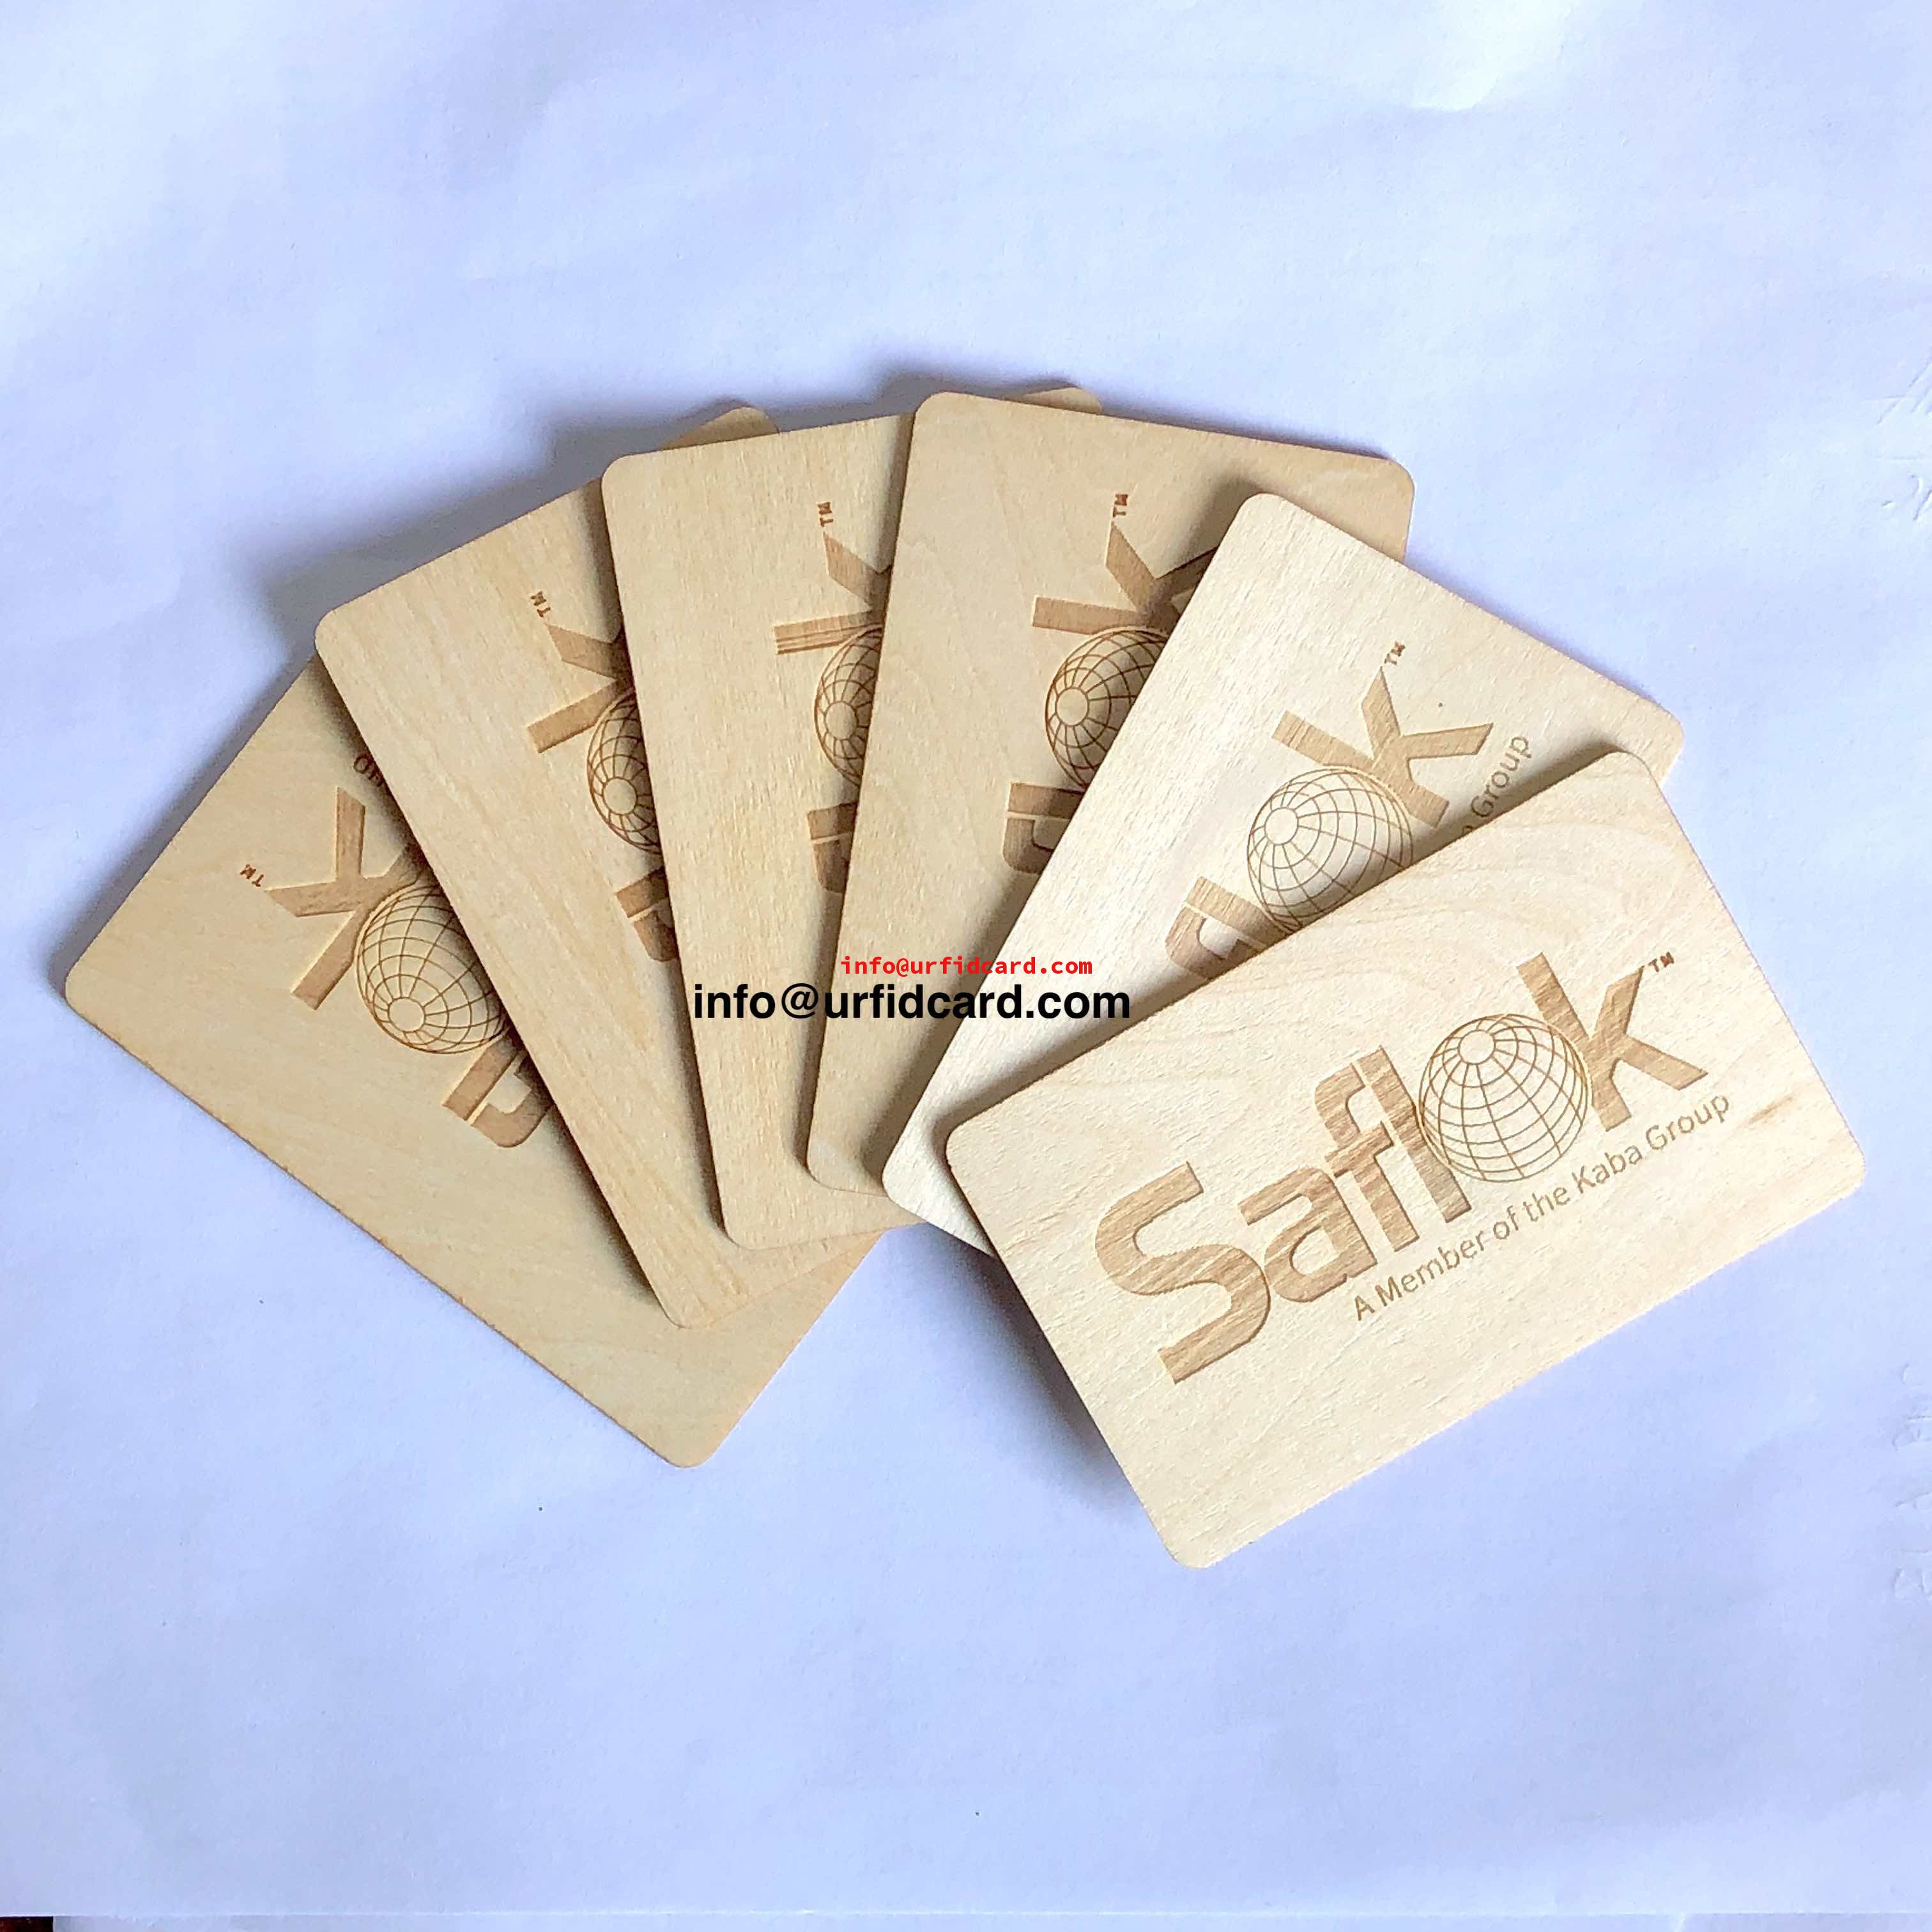 Wooden Key Cards Are Compatible With A Saflok 1k chip